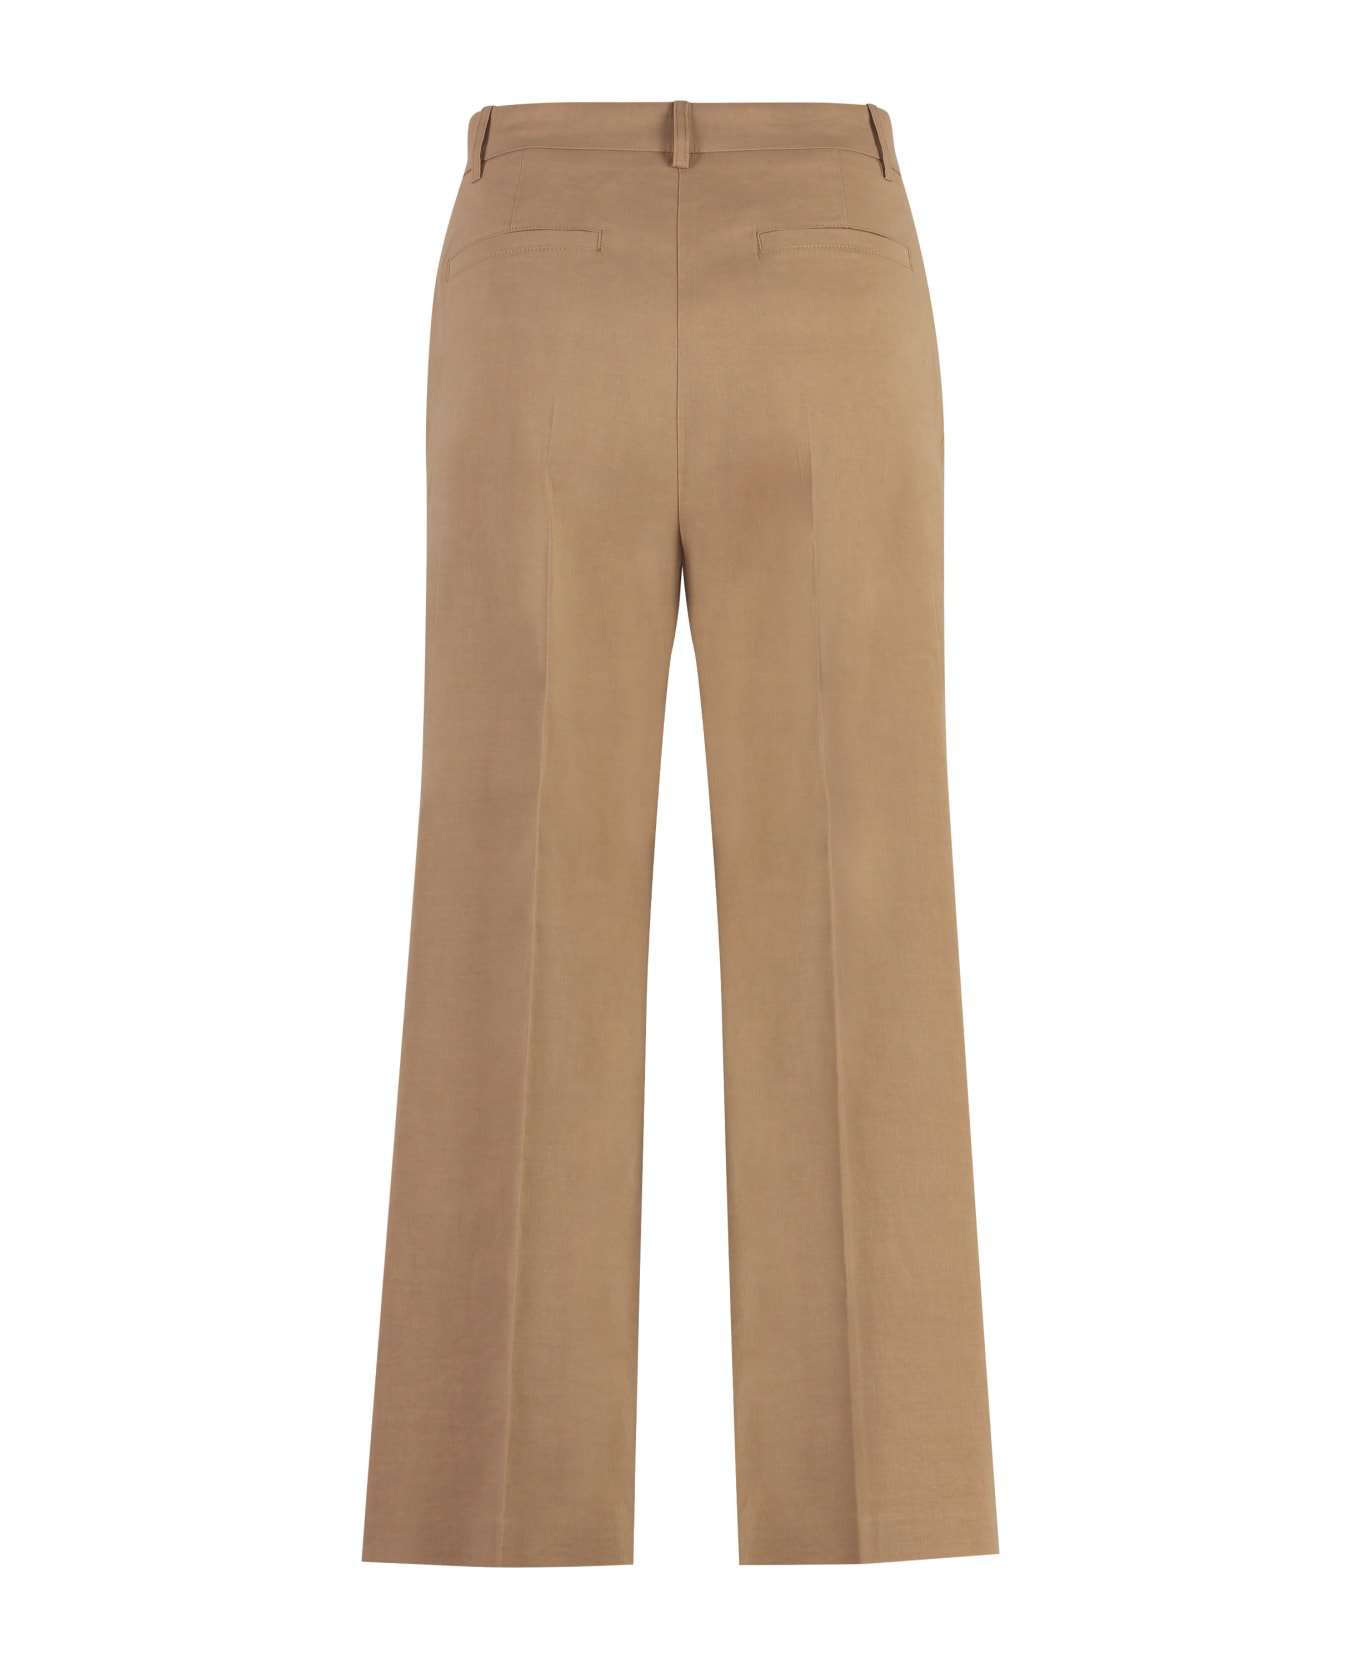 Pinko Protesilao Cropped Trousers - Camel ボトムス